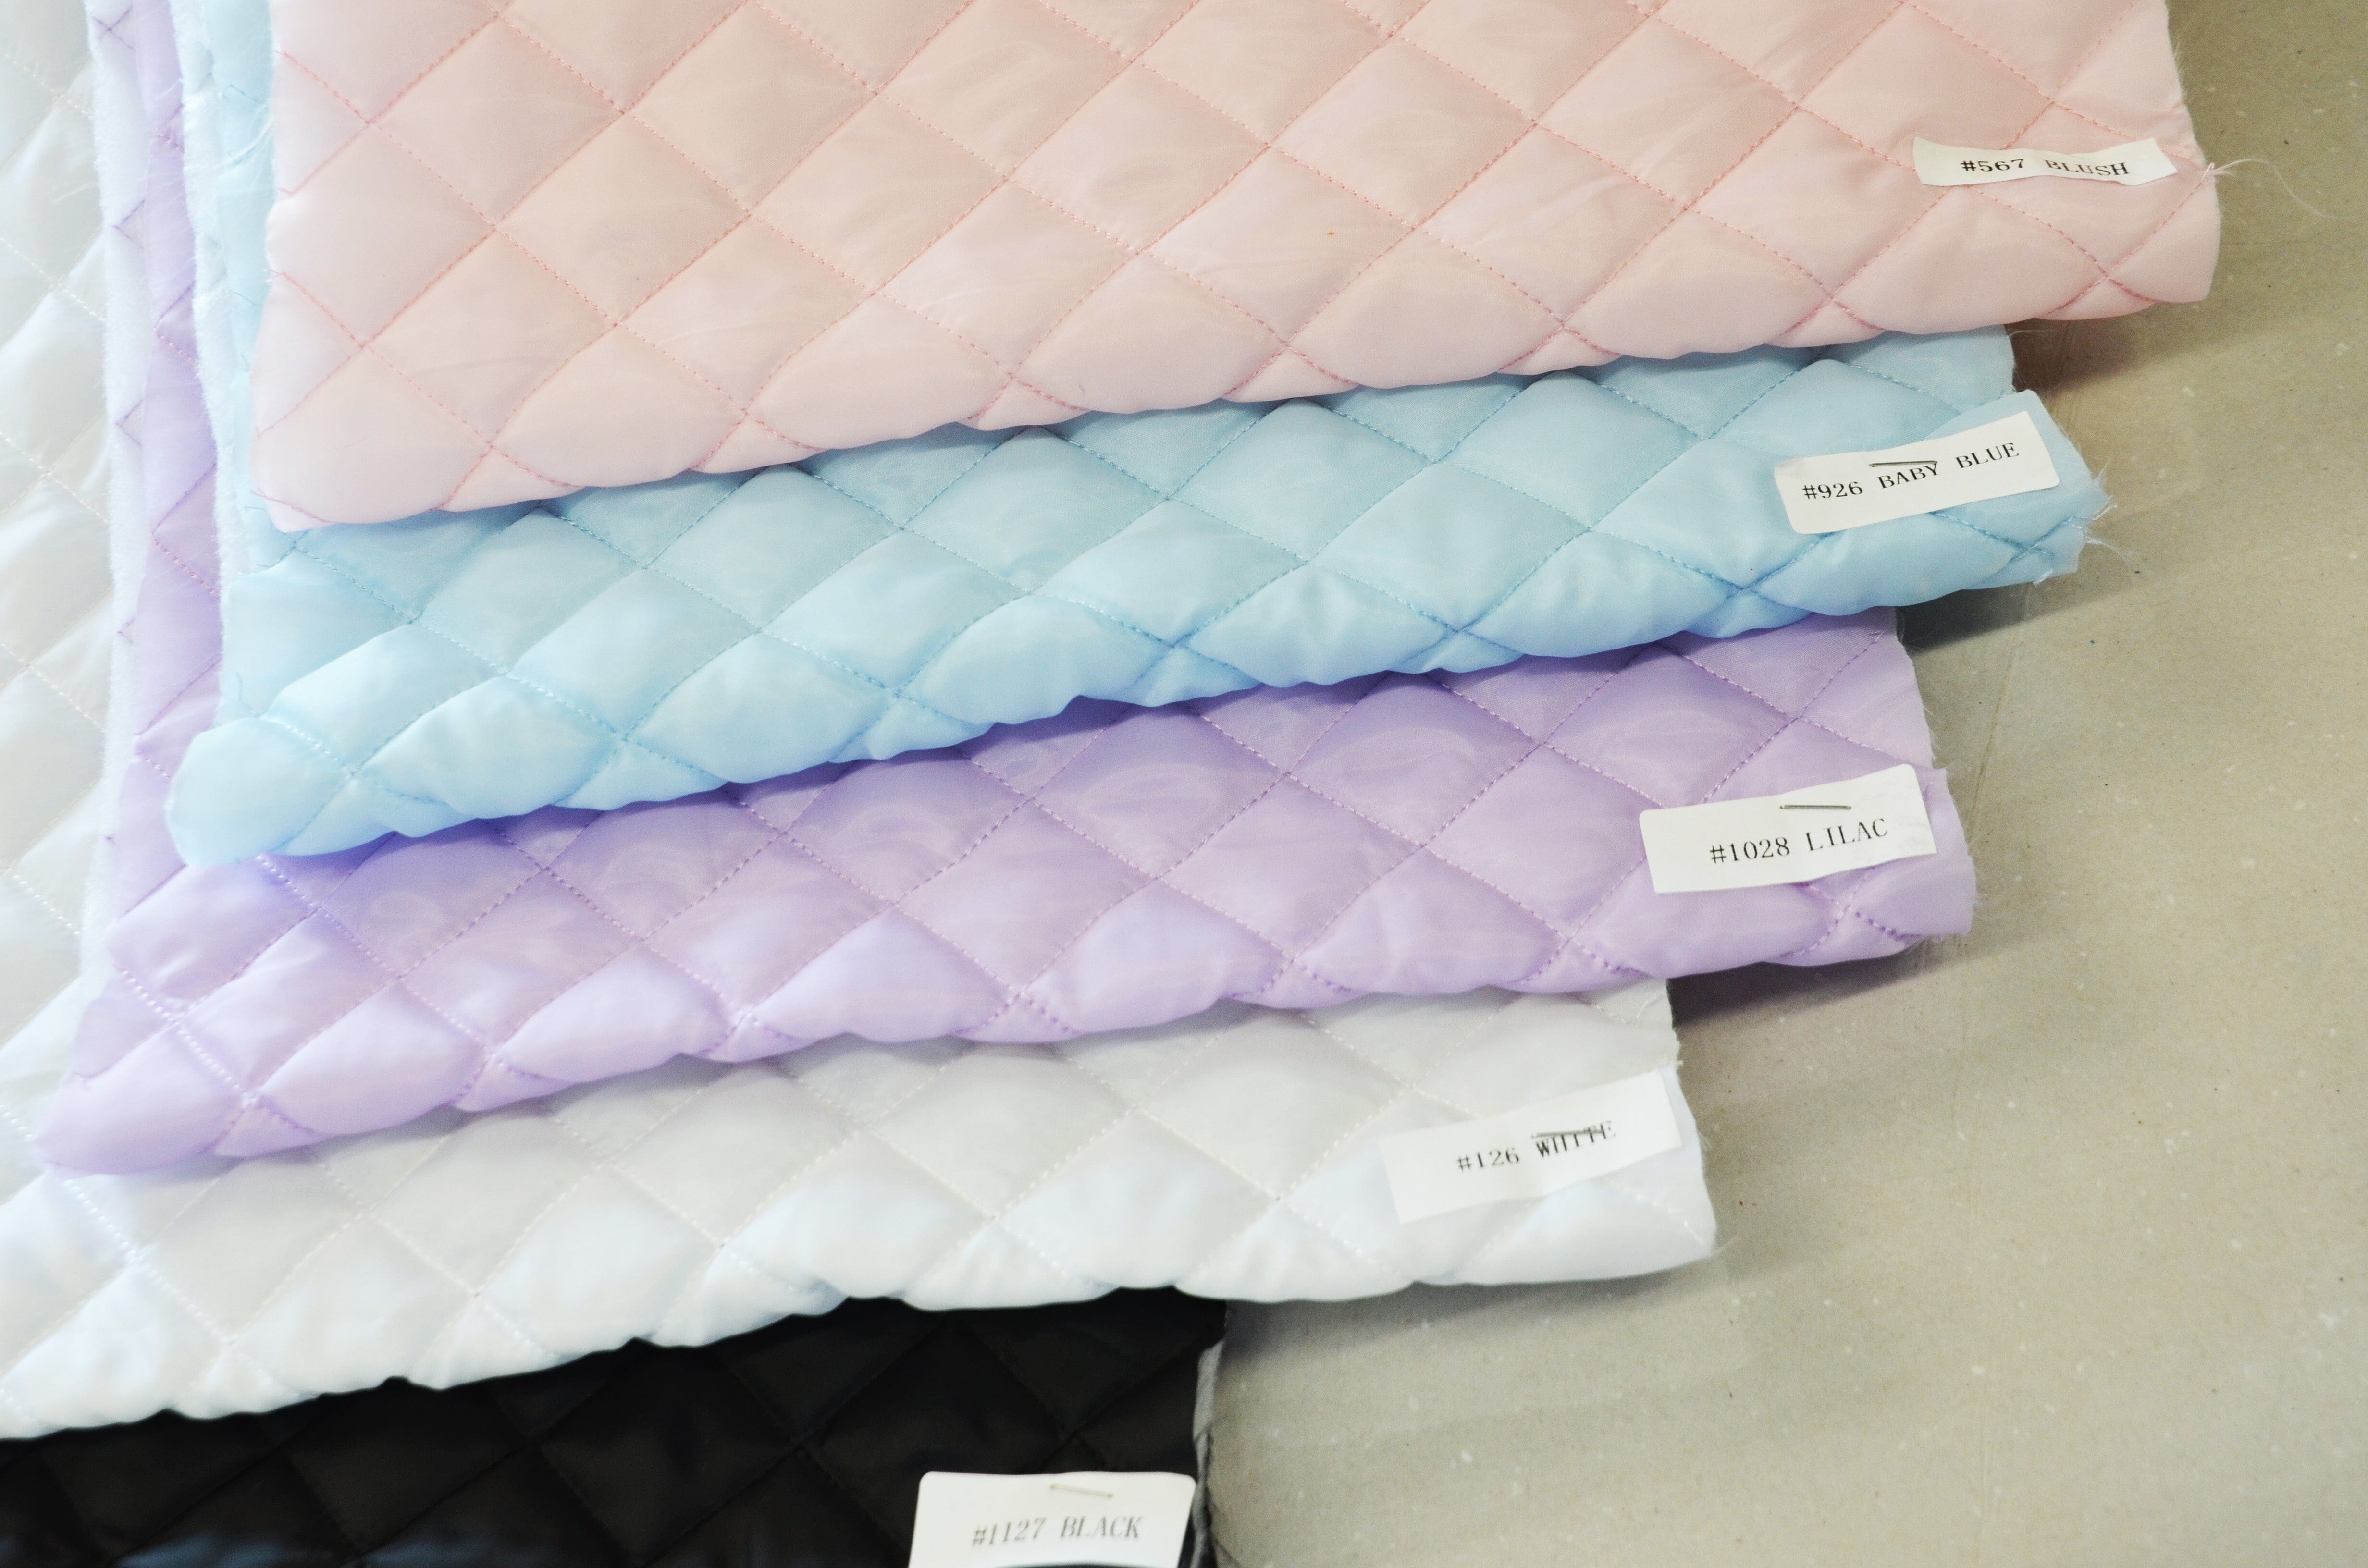 100% polyester taffeta fabric for bag lining fabric and polyester